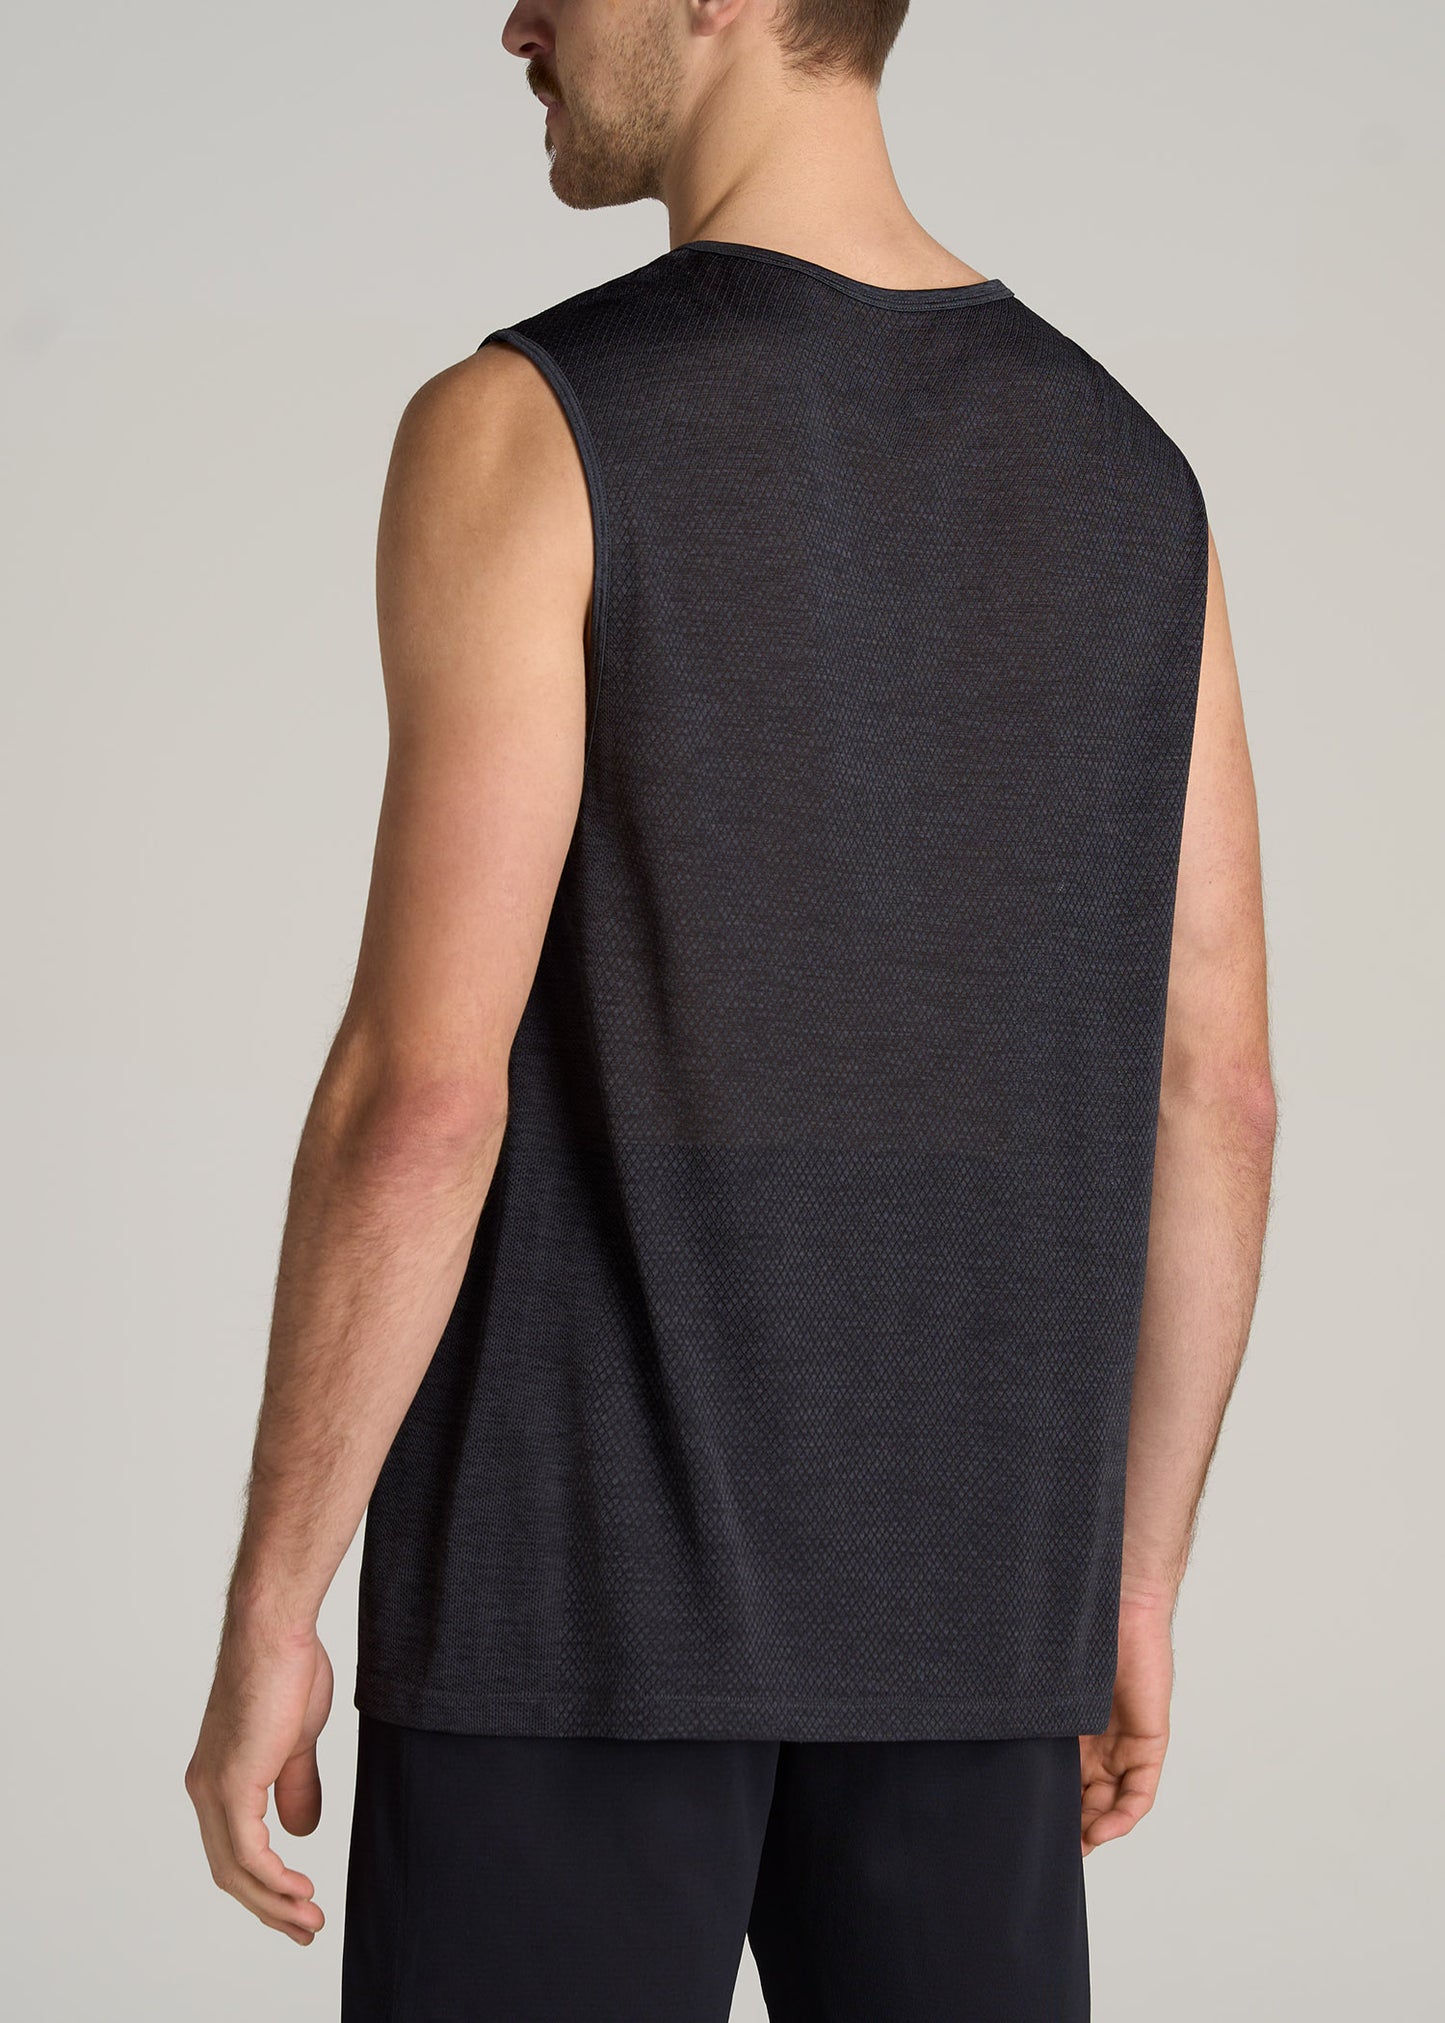 American-Tall-Men-Performance-SLIM-FIT-Engineered-Tank-Top-Charcoal-Mix-back